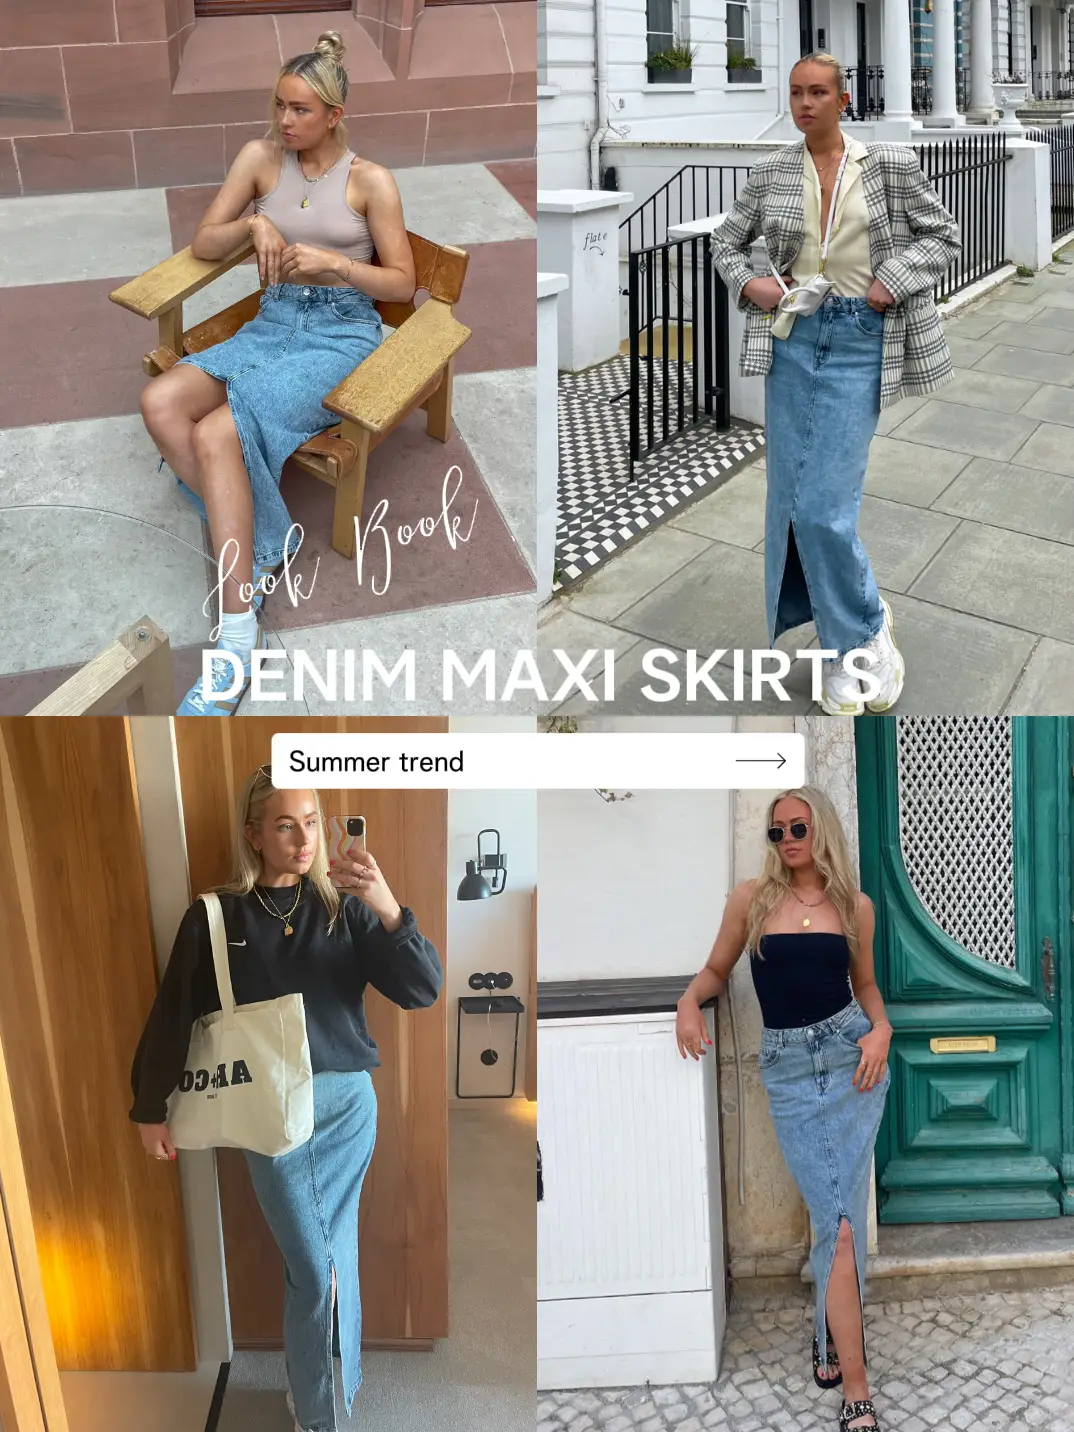 How to Style Denim Maxi Skirts  Skirt trends, Maxi skirt outfits